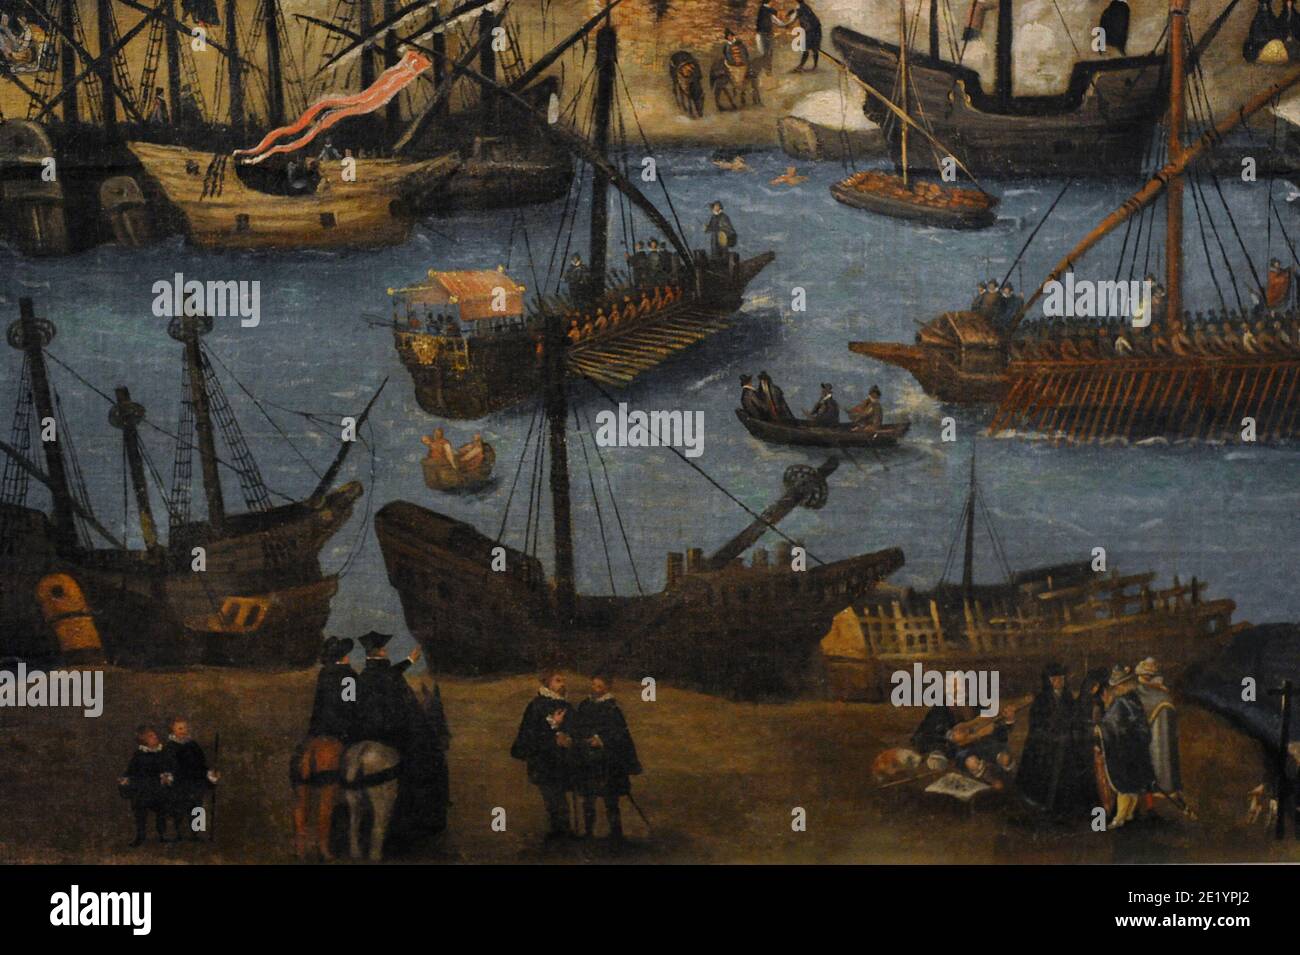 View of Seville, c. 1590. Painting attributed to Alonso Sánchez Coello (1531-1588). Oil on canvas. Detail. Shipyard on the river Guadalquivir. Prado Museum, on deposit at the Museum of the Americas. Madrid, Spain. Stock Photo